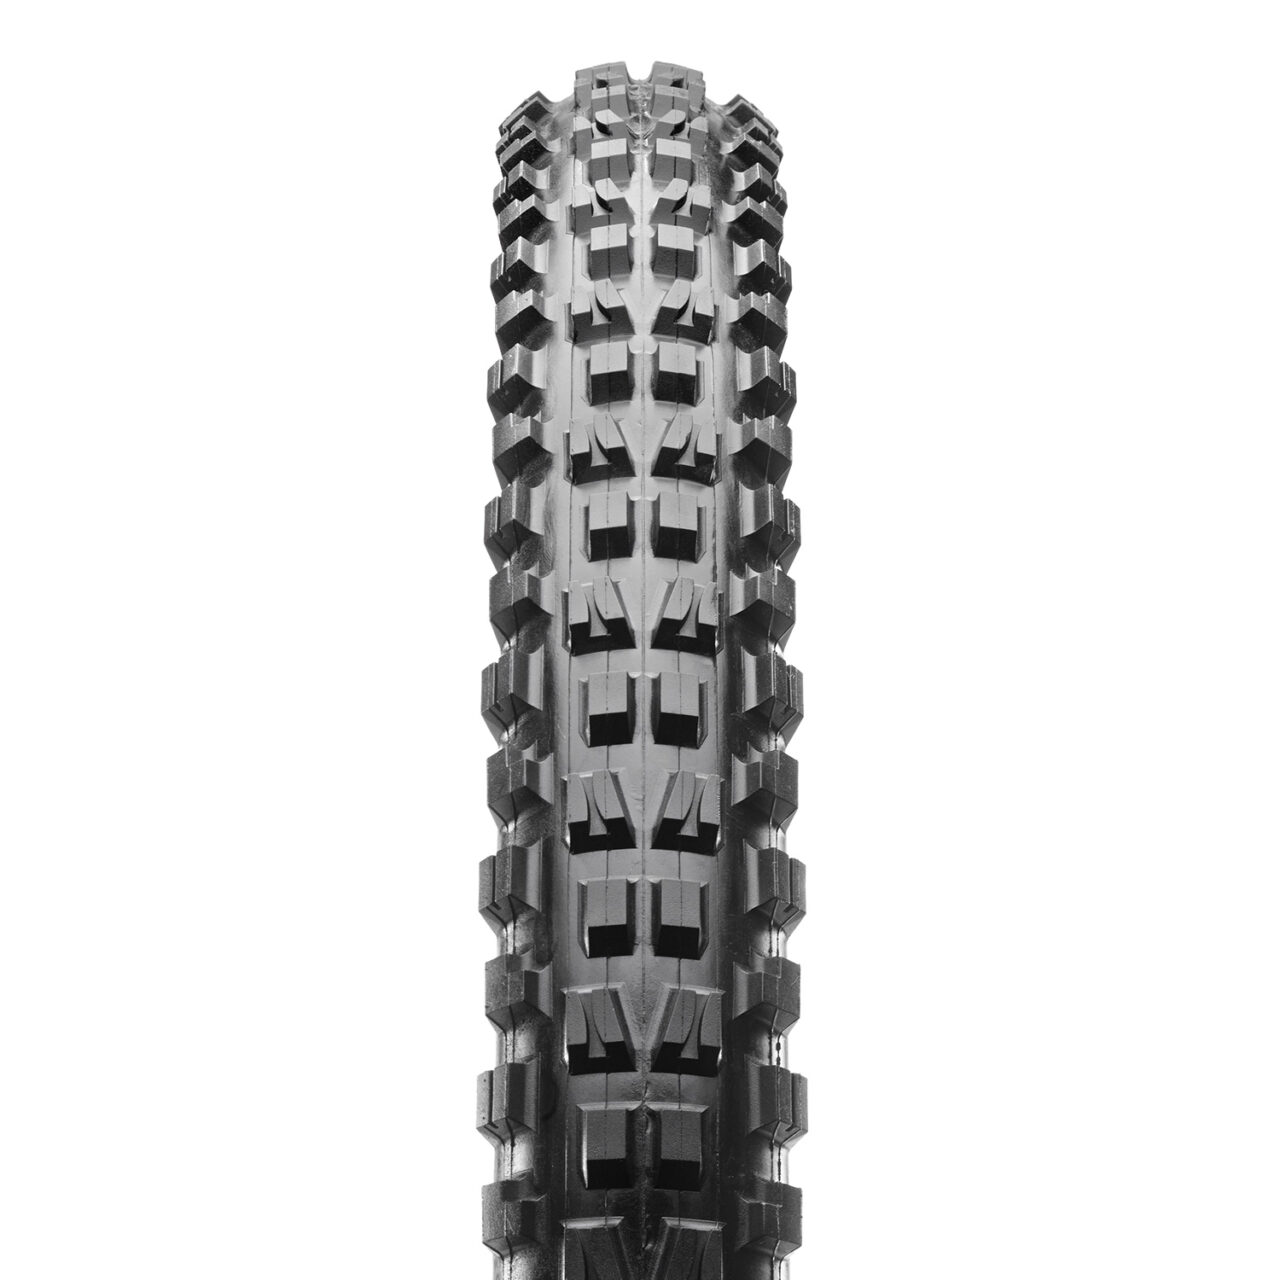 Maxxis Minion DHF bicycle tire tread